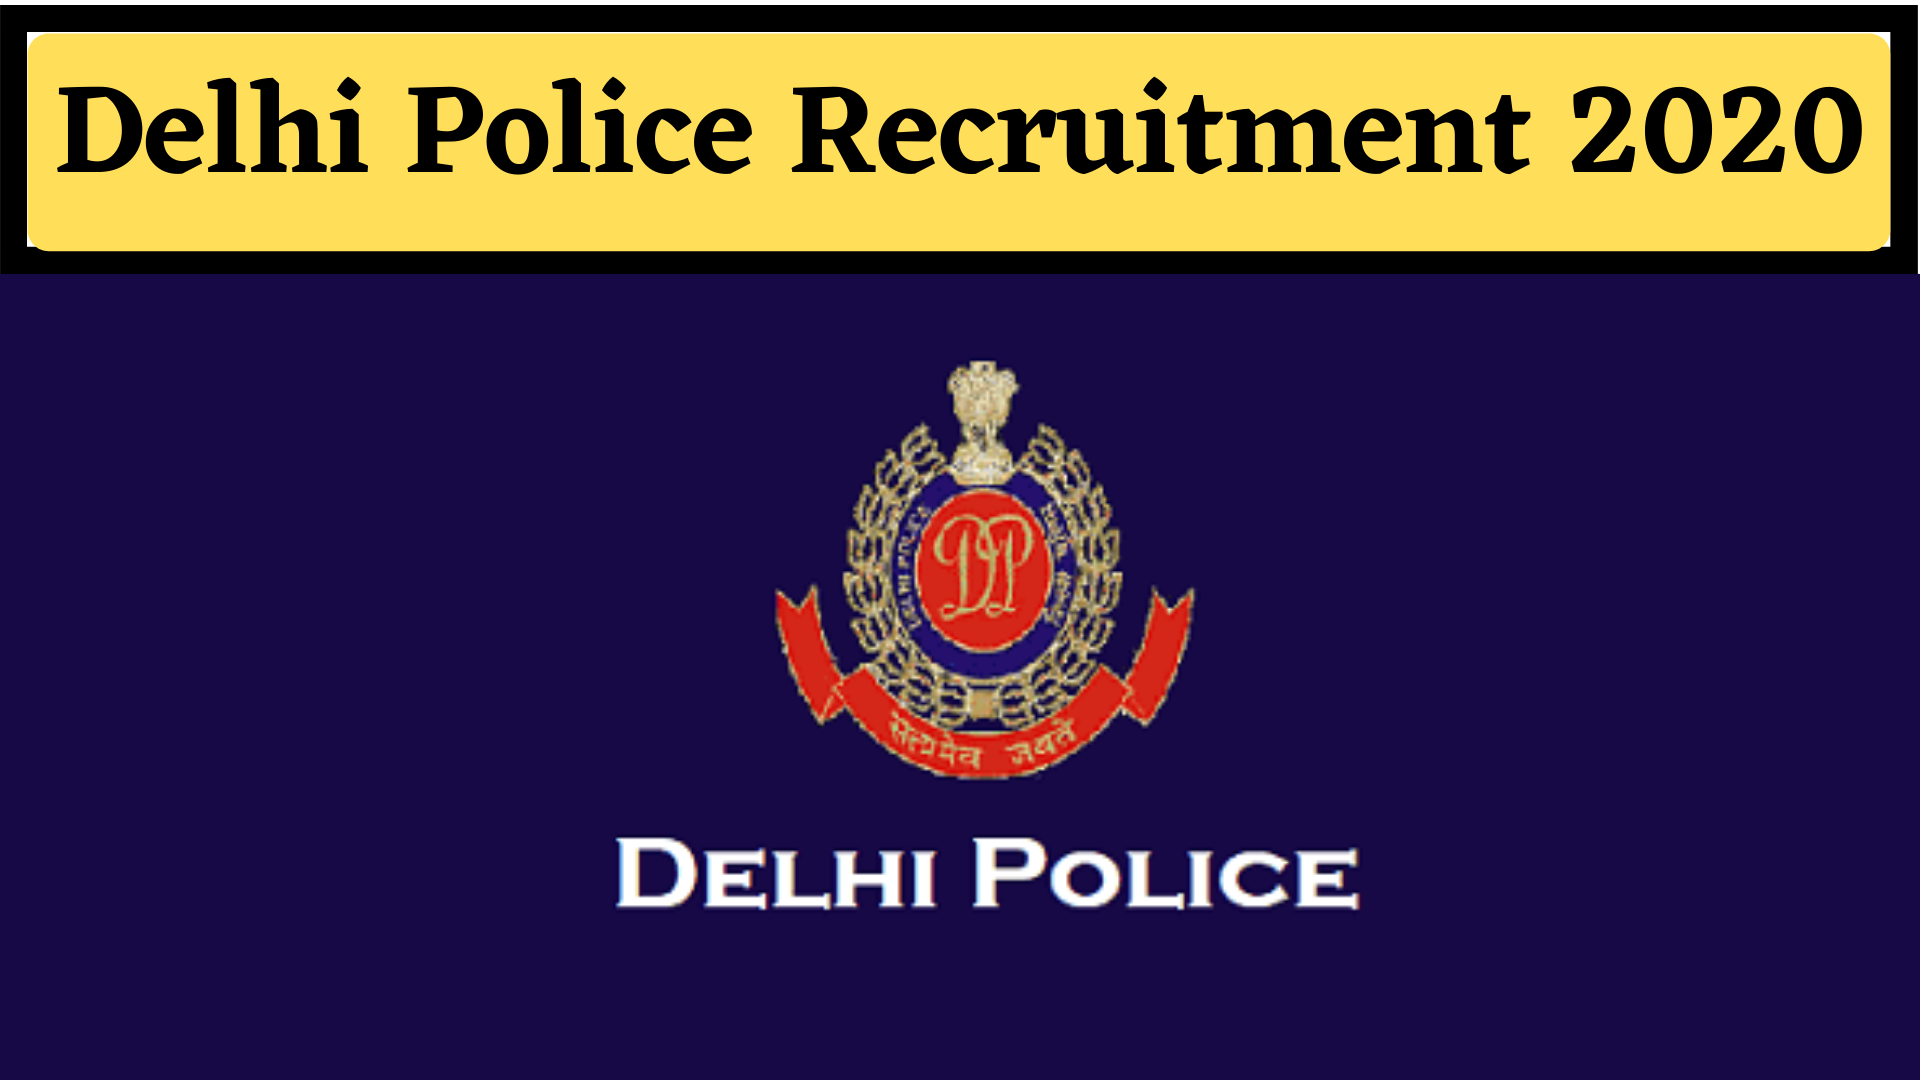 Delhi Police Constable Recruitment 2020 Latest Notification and DP Online Application for Upcoming 5000 Constables Job Openings released to apply at ... DP Vacancy 2019 Details‎: ‎1) Constables ... Registration Dates‎: ‎UPDATE SOON Number of Vacancies‎: ‎05,000 vacancies (approx) Job Category‎: ‎Government Jobs ‎Delhi Police Recruitment 2020 · ‎Rajasthan Police Recruitment